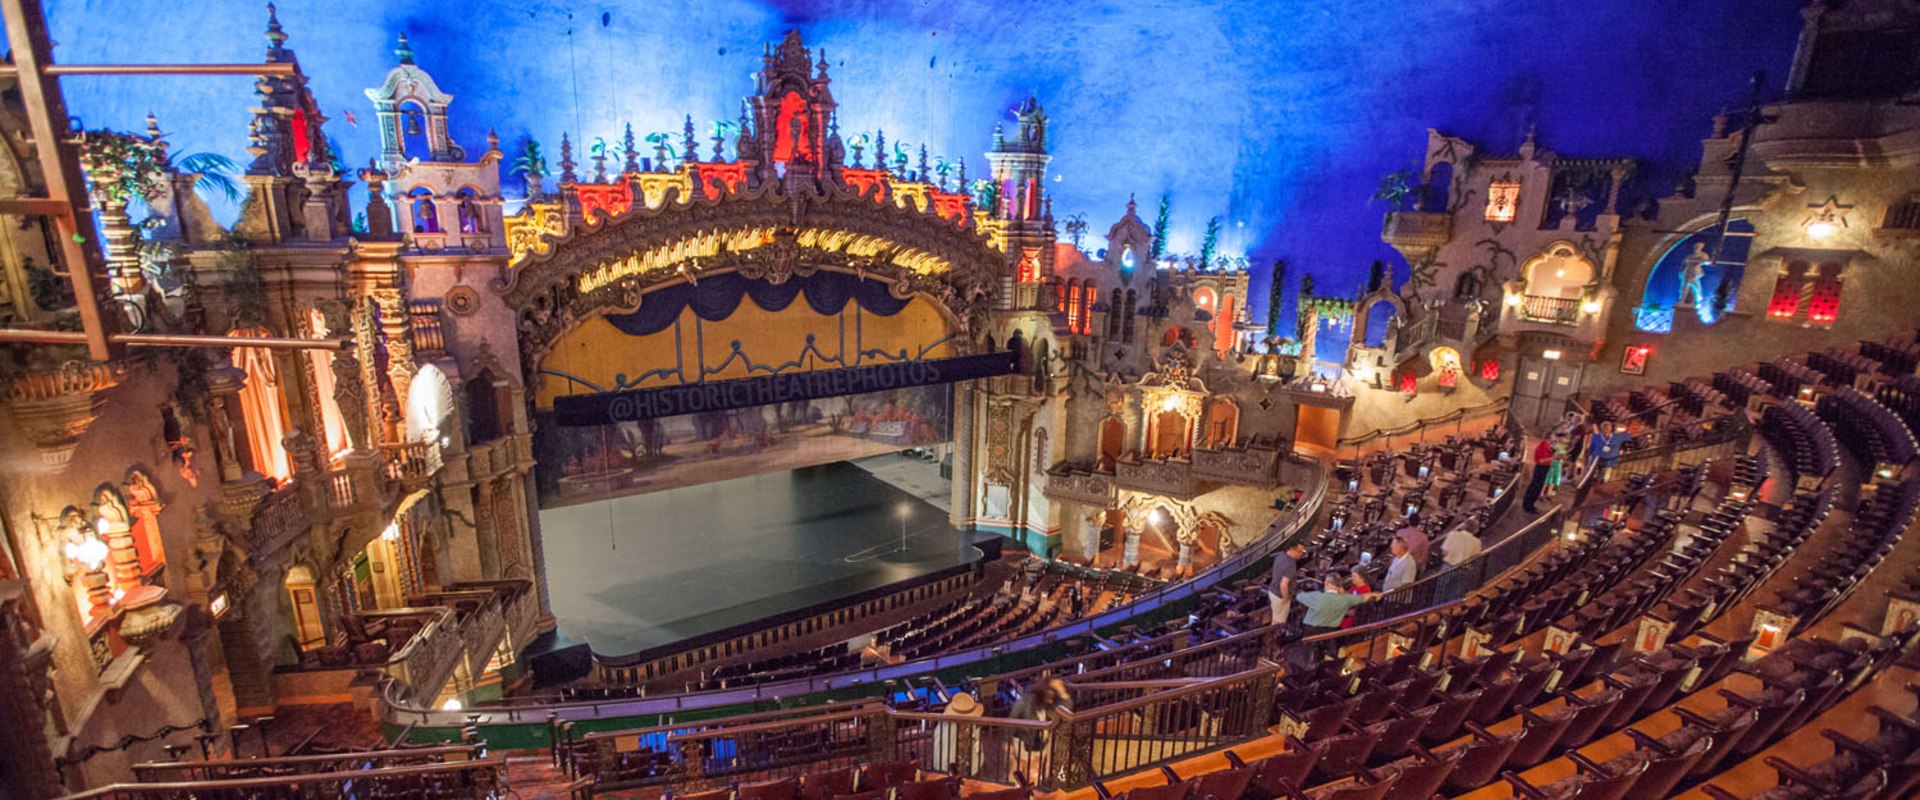 The Top Theatres in San Antonio, TX: A Look at the Most Popular Plays and Musicals